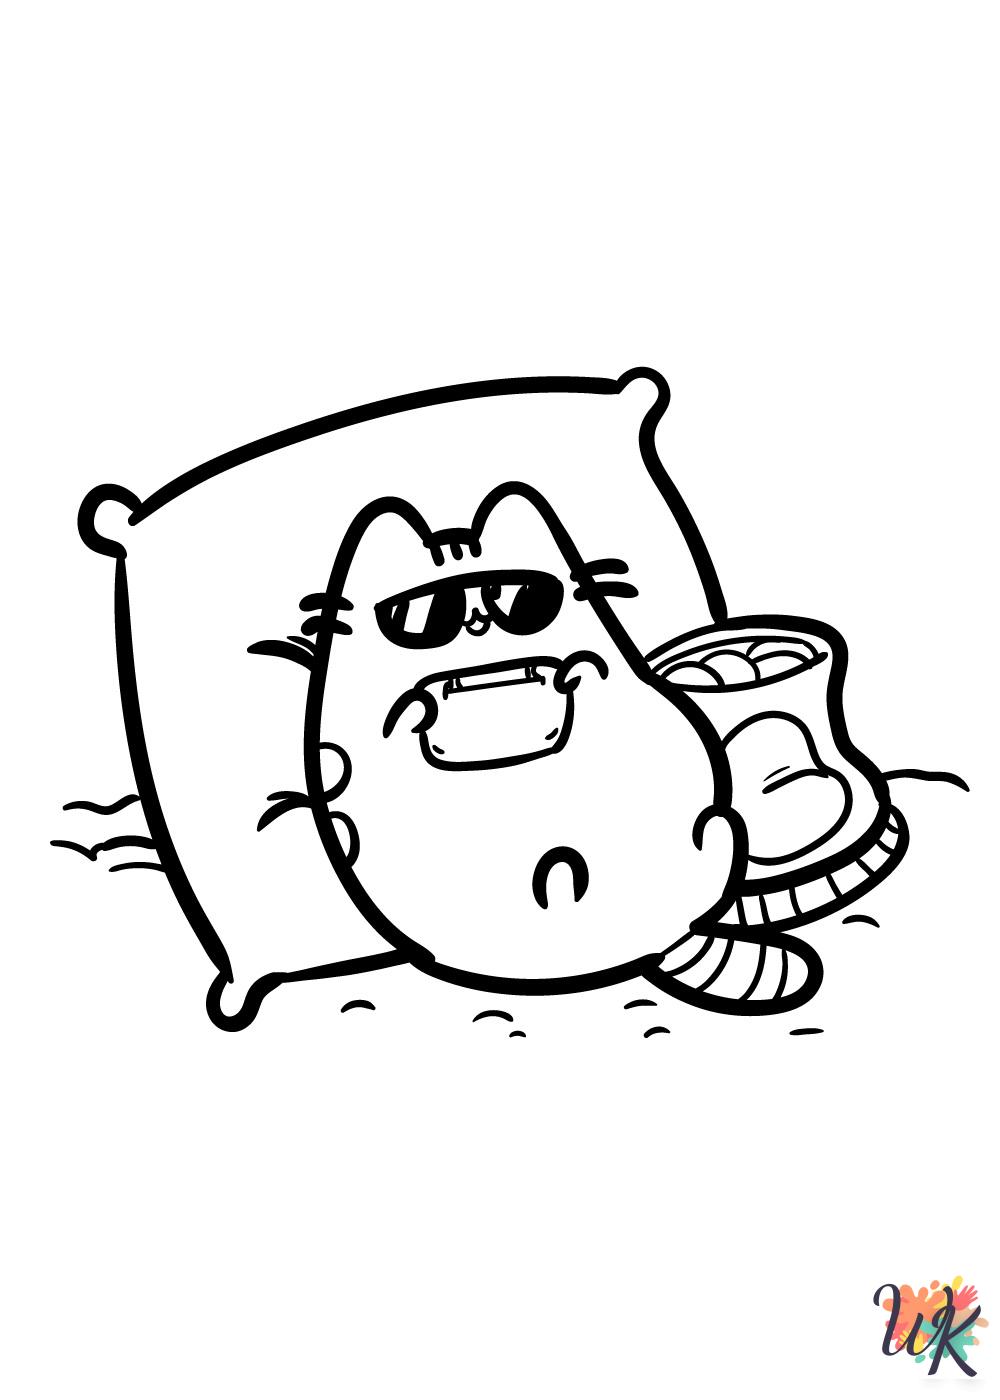 Pusheen coloring pages for adults